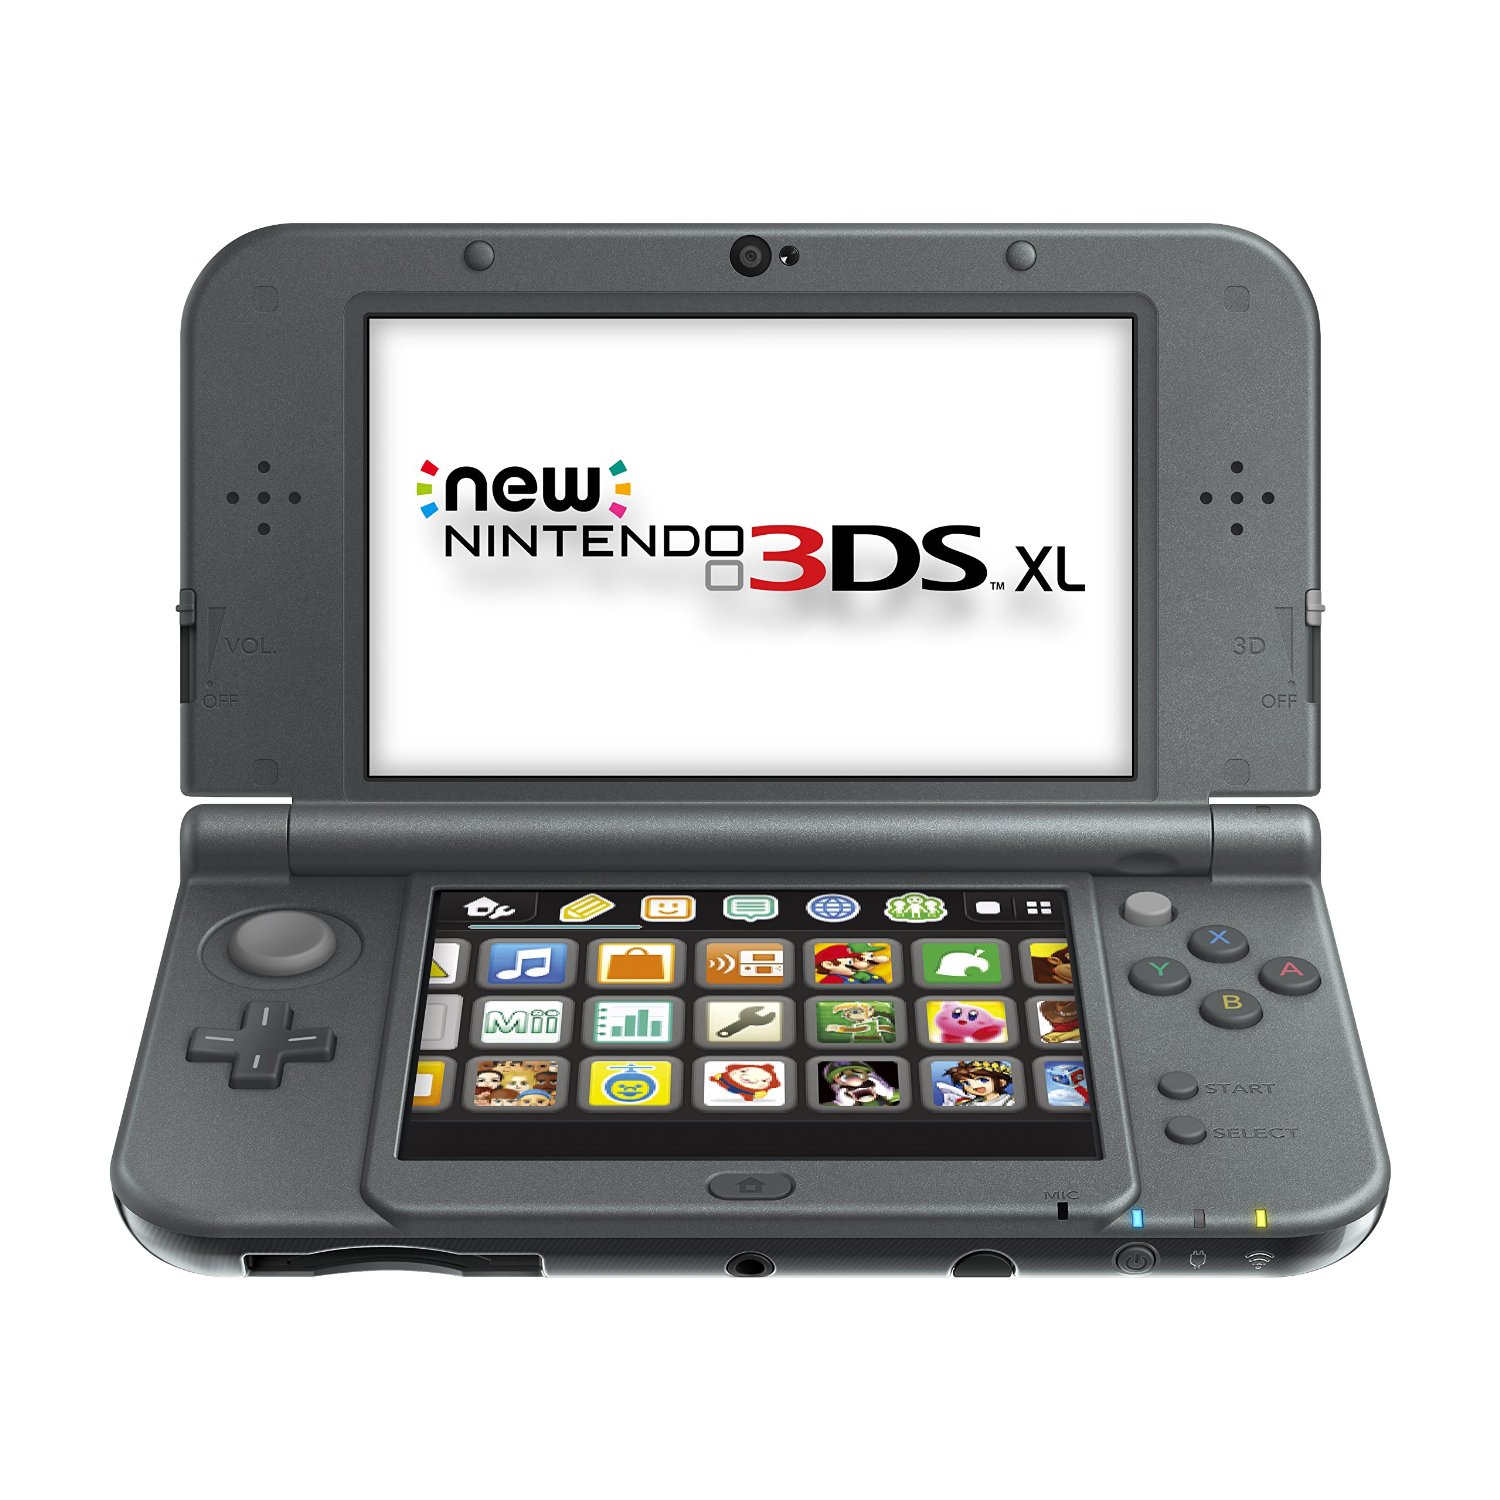 Last Chance: Nintendo Stops Selling 3DS, Wii U eShop Games Today